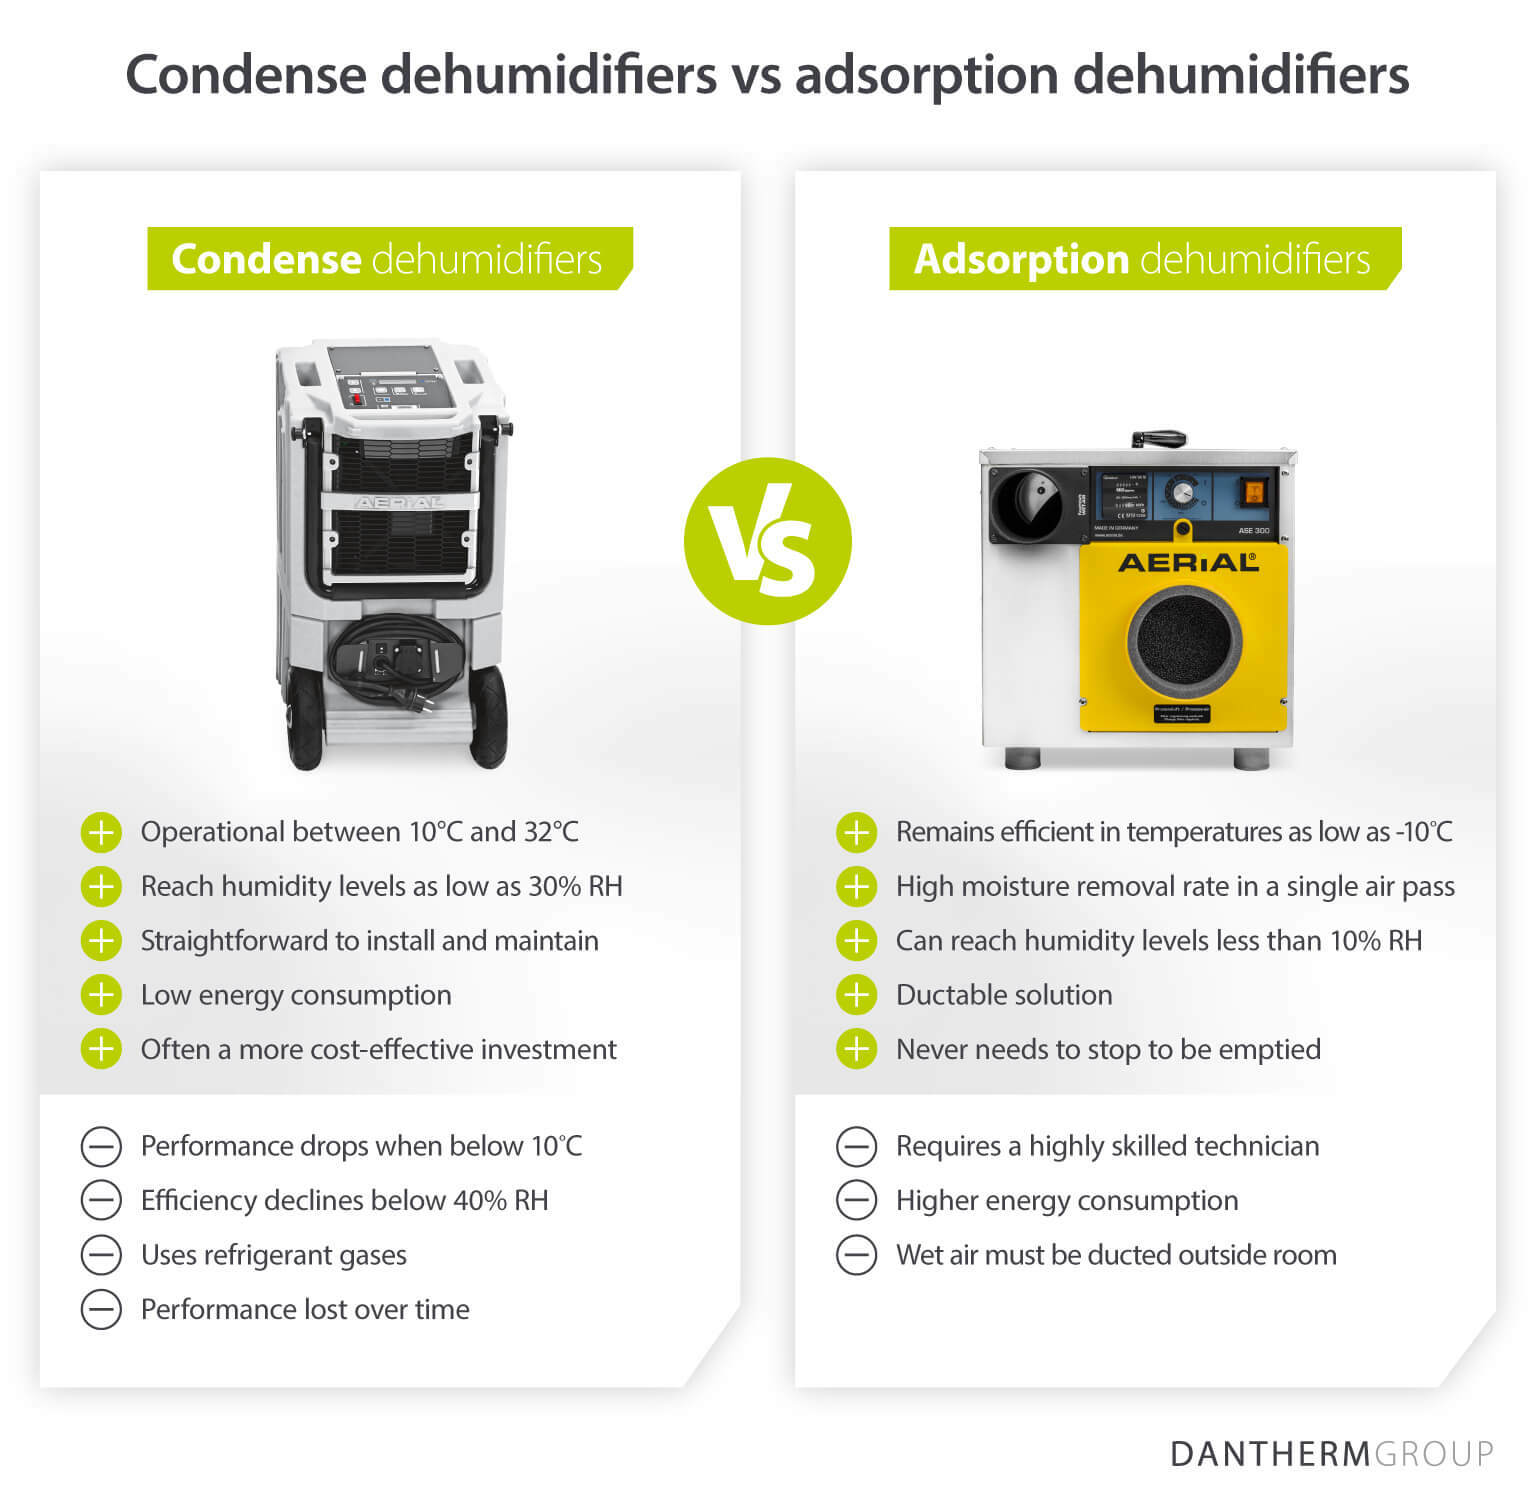 Comparing pros and cons of using condensation vs adsorption dehumidifiers to treat water damage - Infographic image